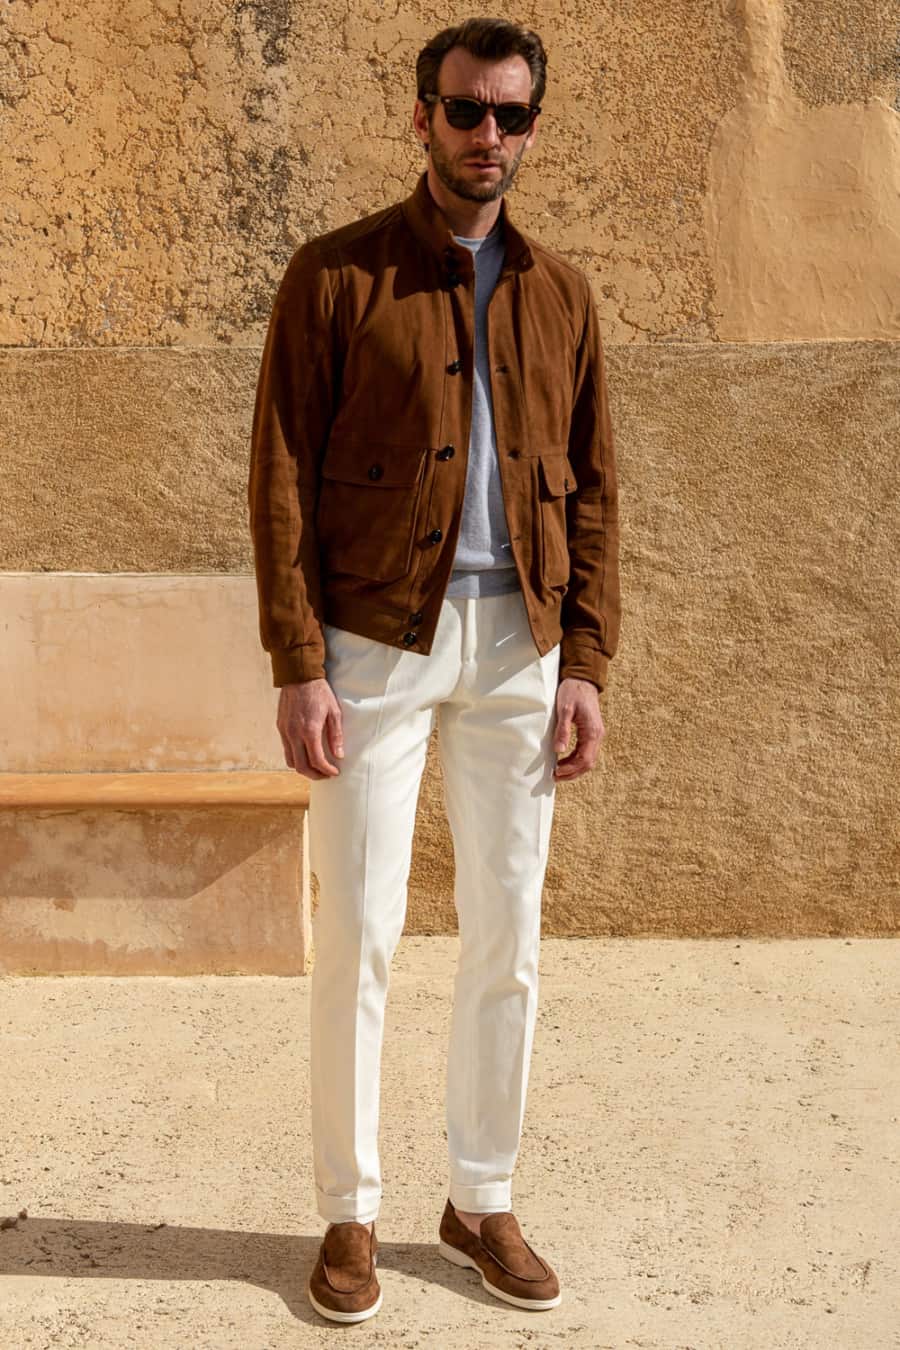 Men's white trousers, grey sweater, brown suede bomber jacket and brown suede loafers outfit